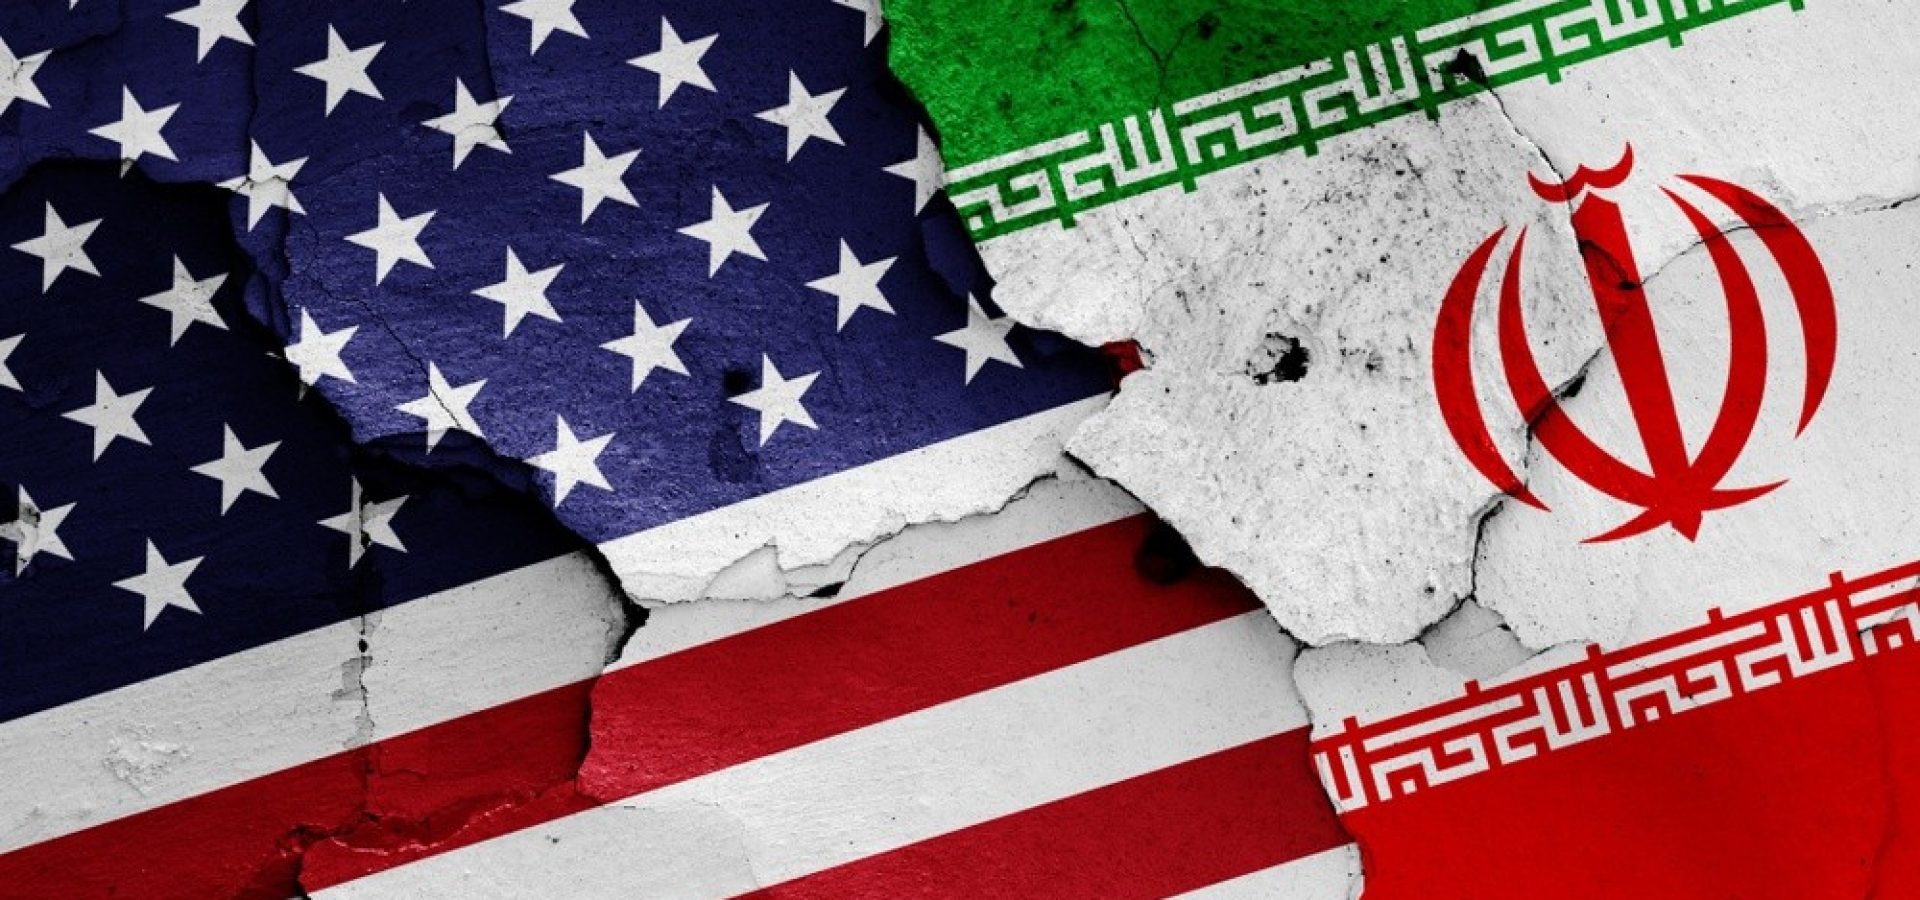 Wibest – Petroleum: The US and Iran flags